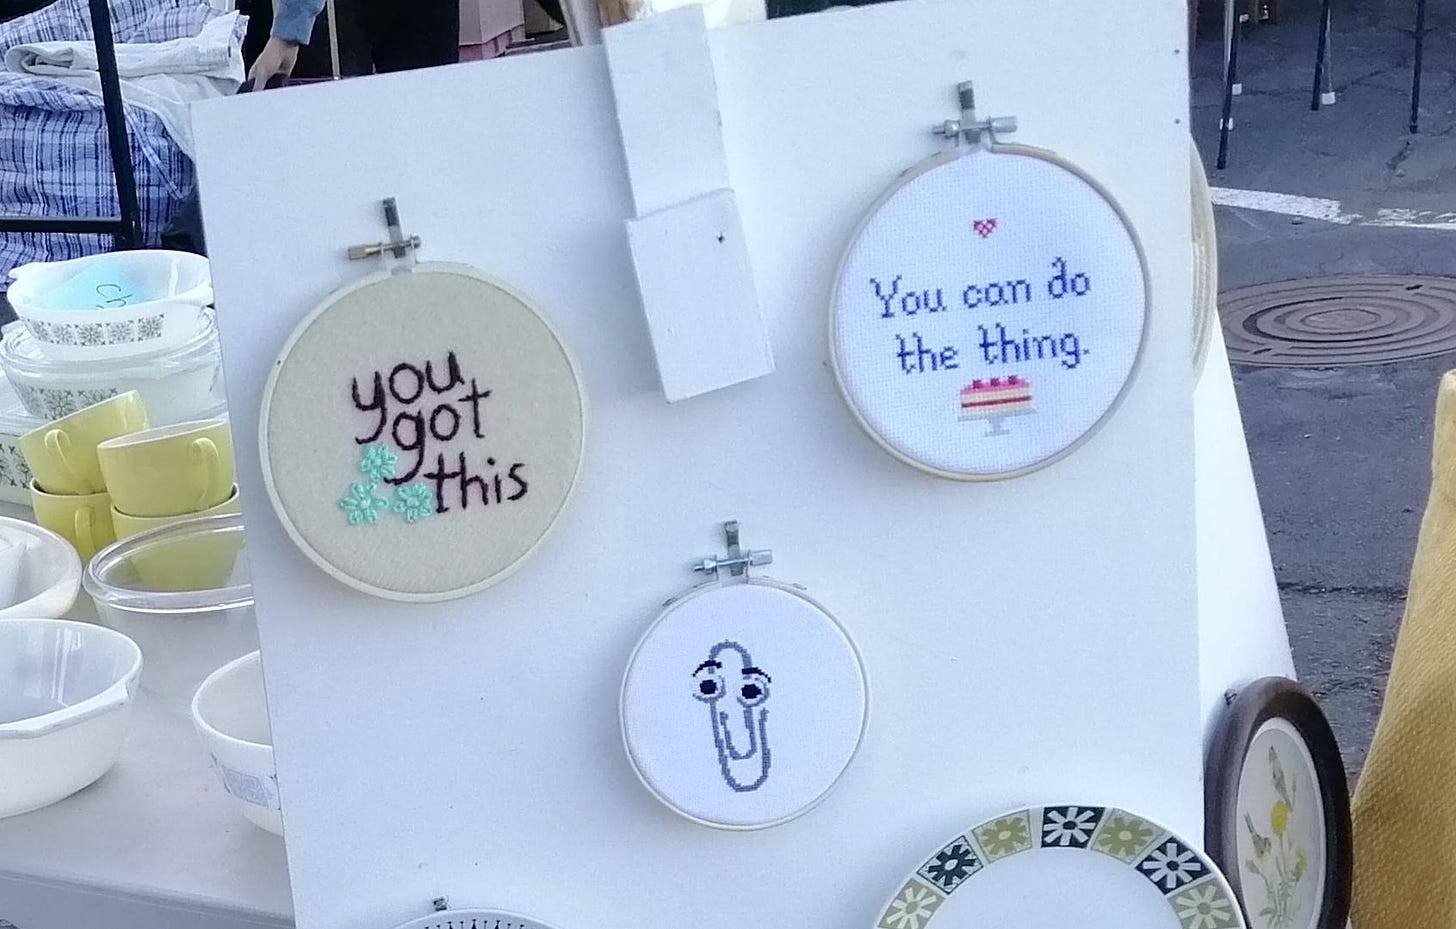 Cross stitches in hoops on a market stand, one reads "you got this", one "you can do the thing" with a picture of a cake, and one of Clippy, the Microsoft Word Assistant from ye olden times